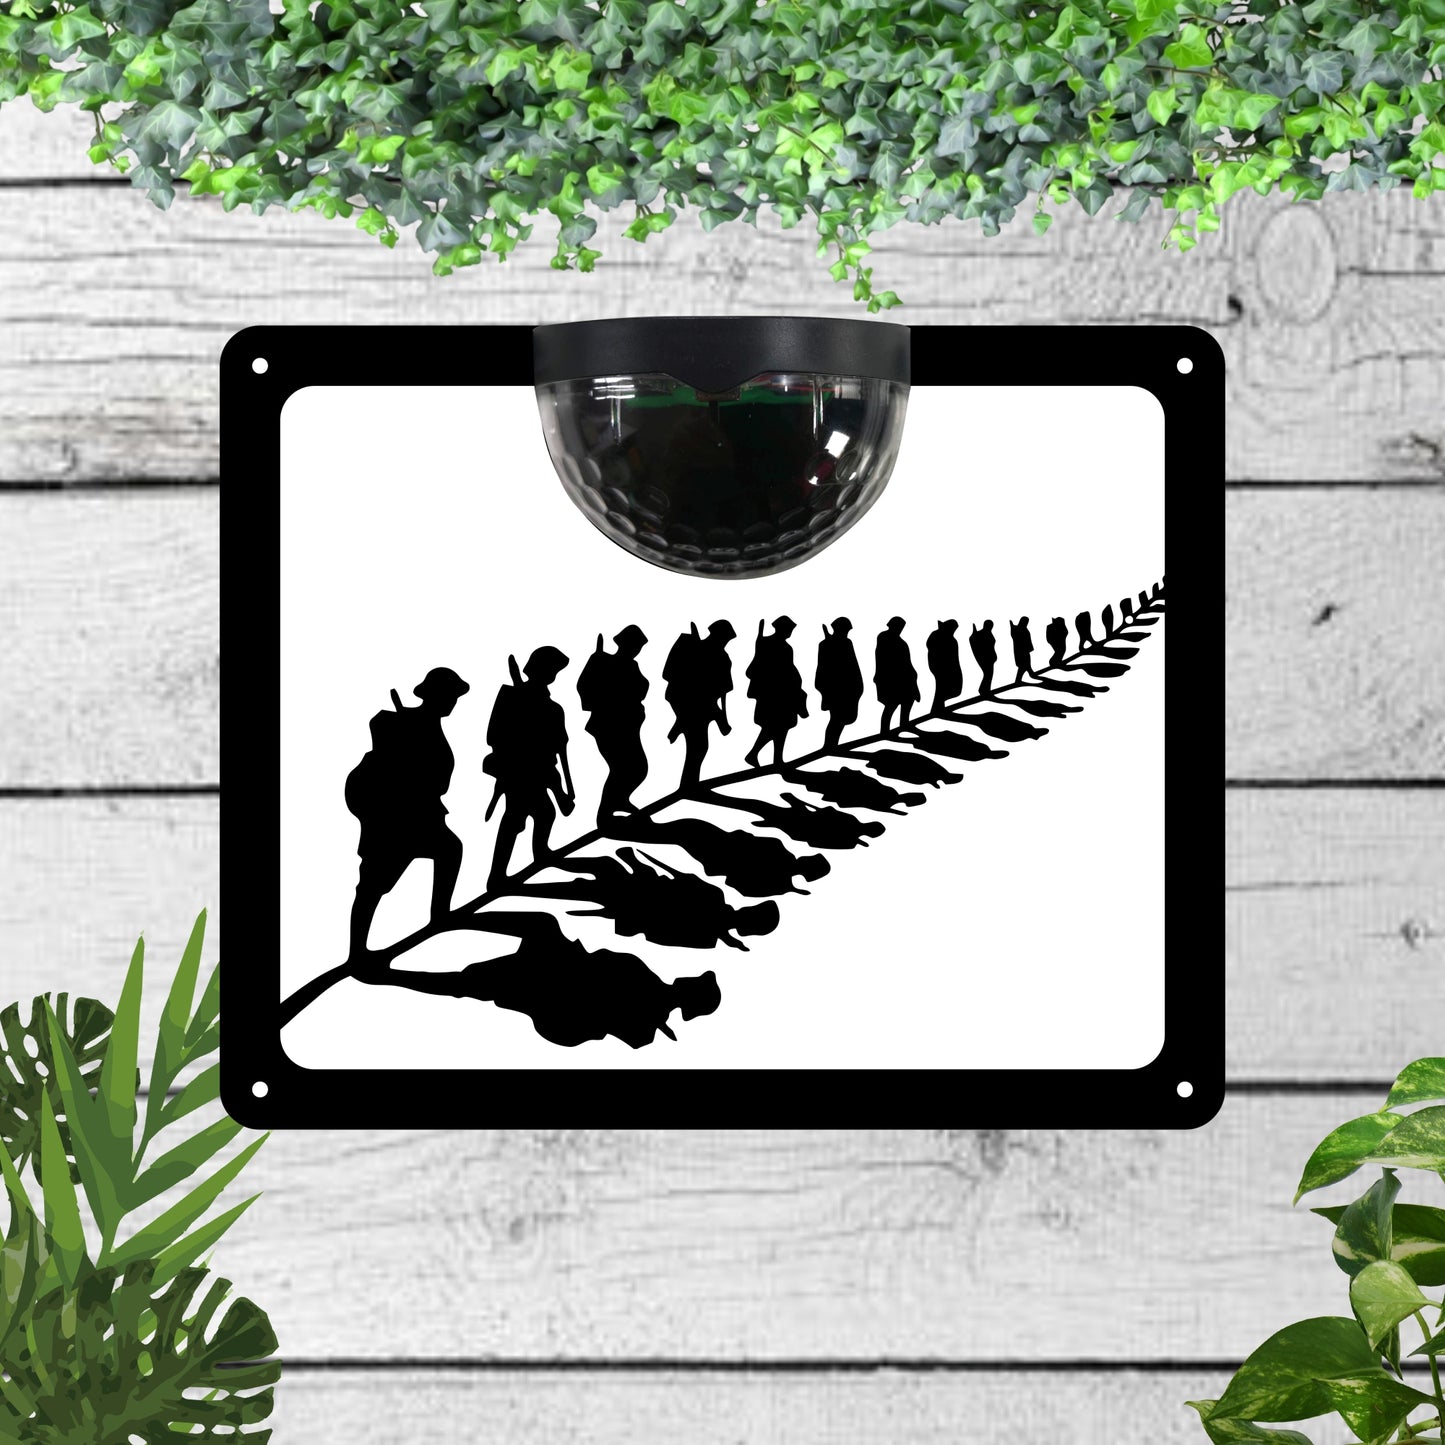 Garden Solar Light Wall Plaque Featuring Reflections Of Soldiers Remembrance Plaque | John Alans